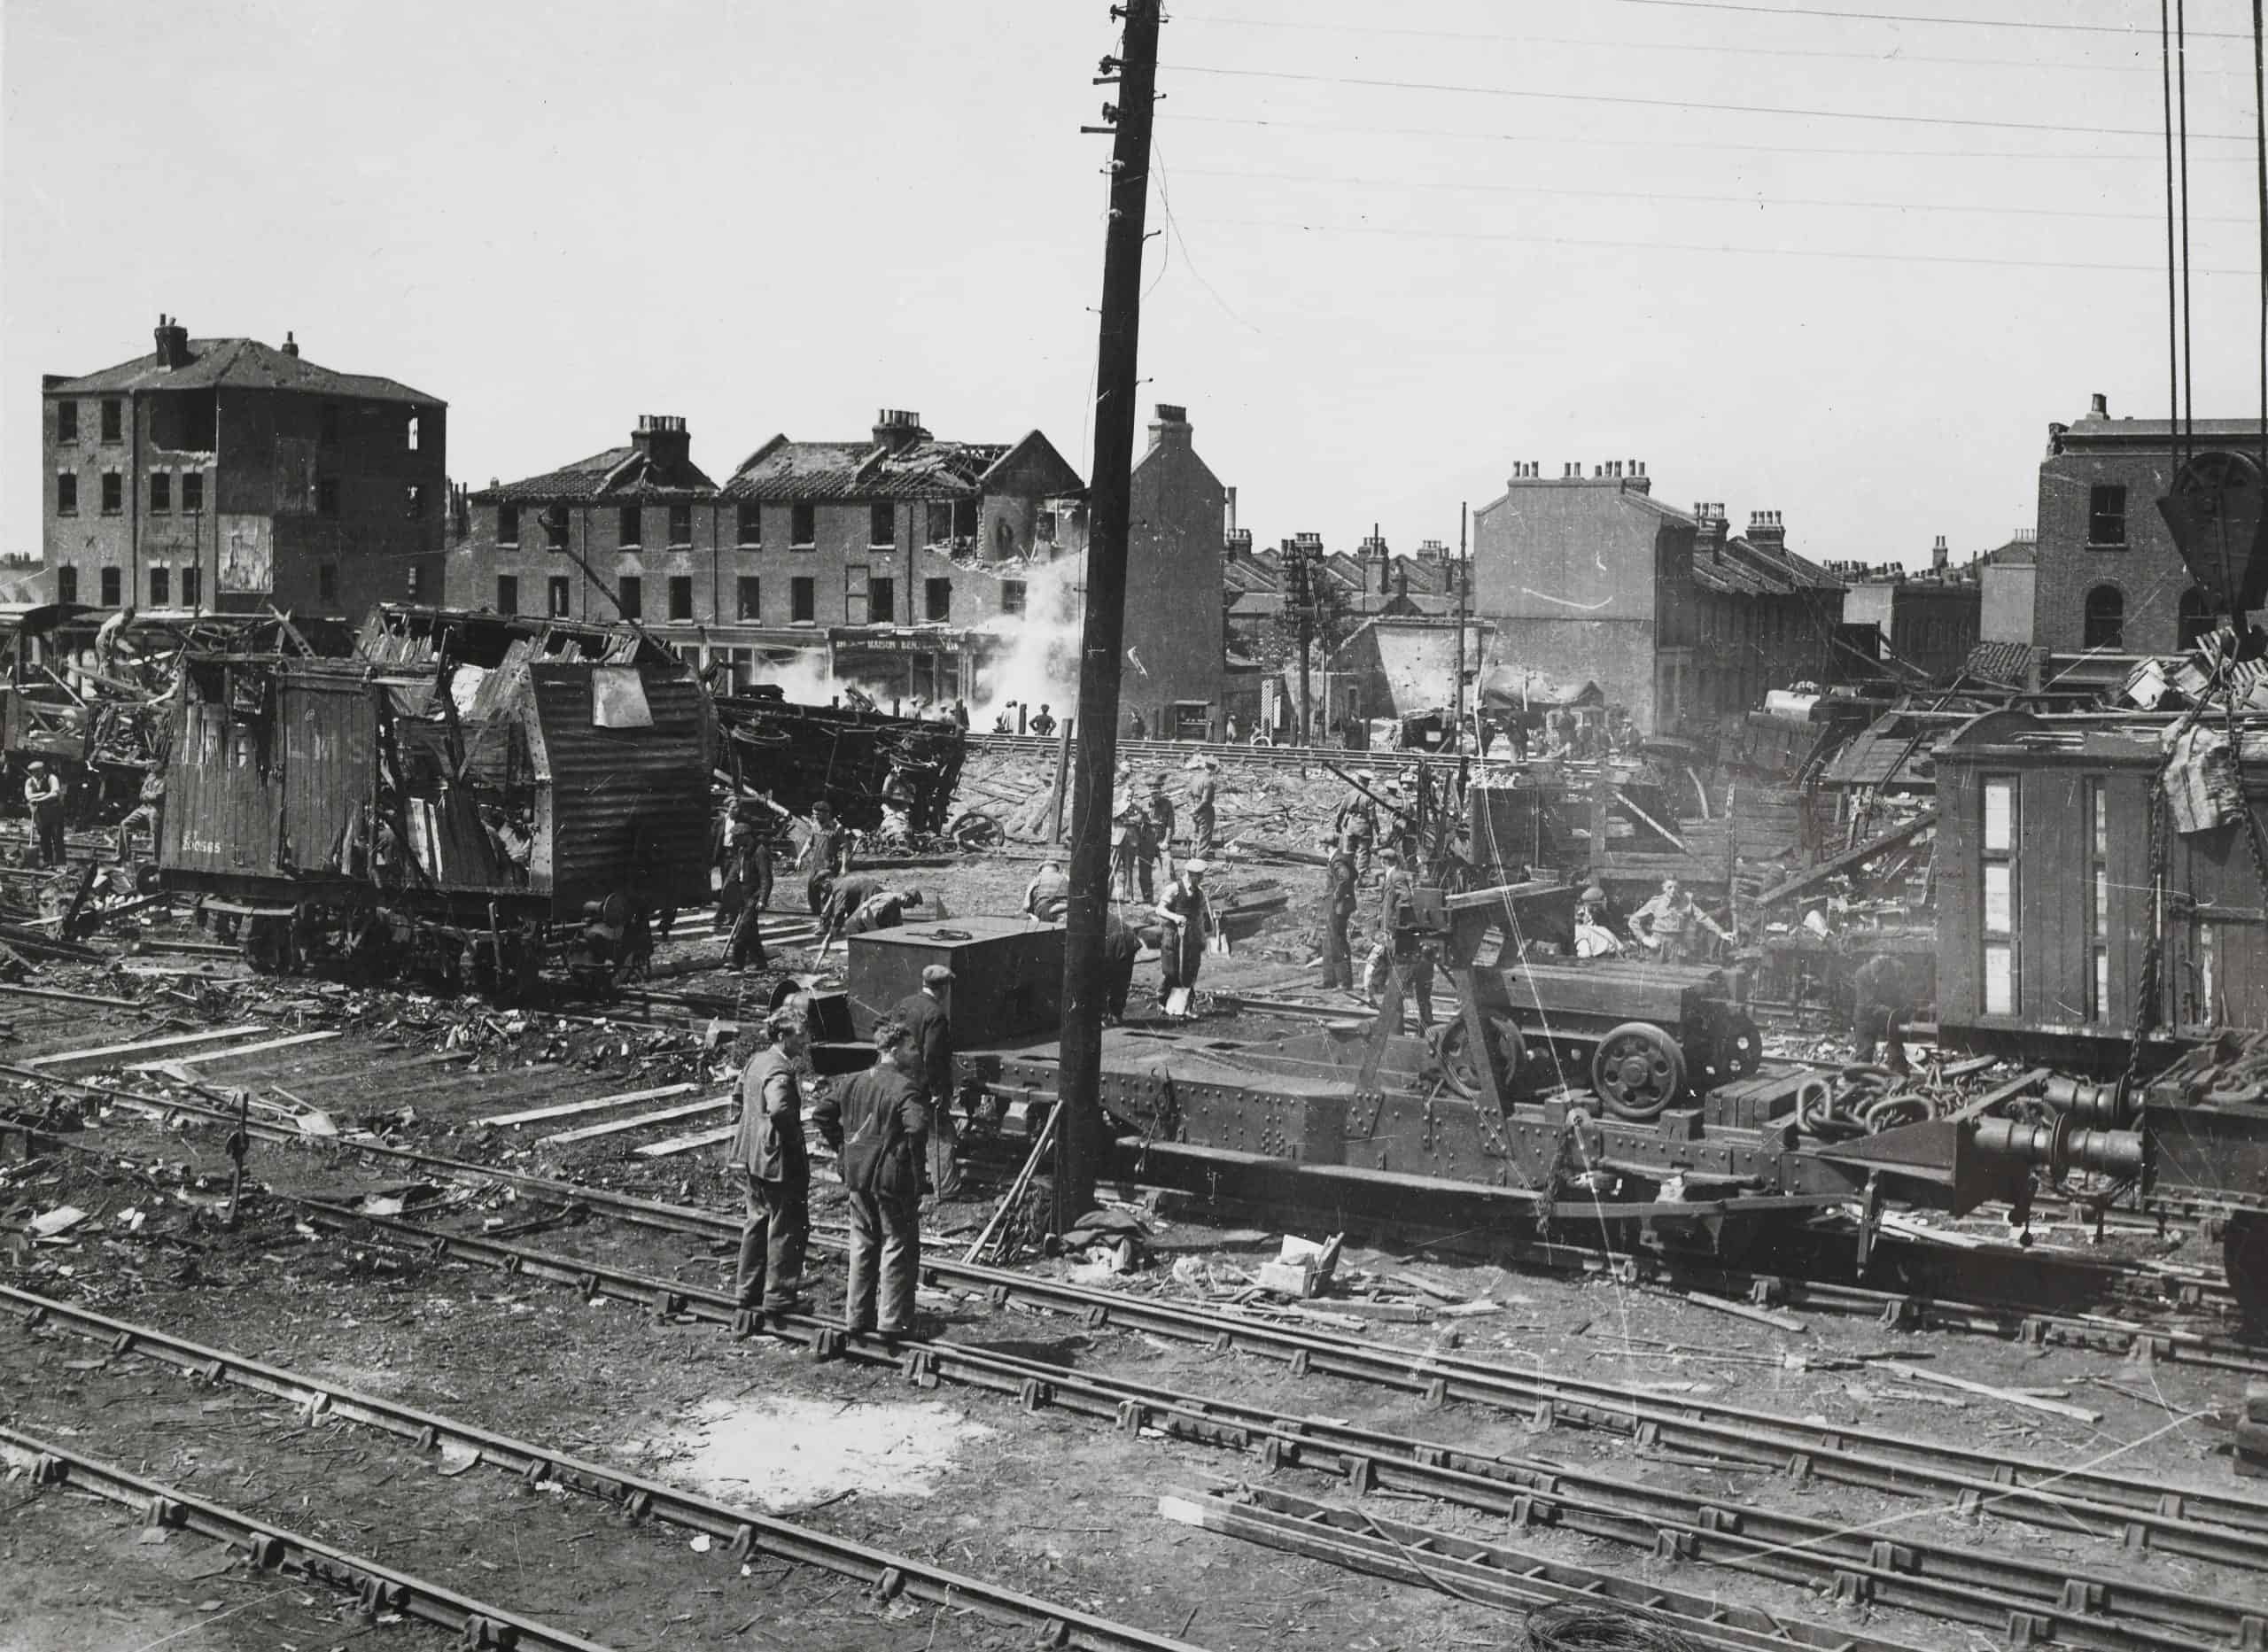 Damage caused by a V1 rocket which hit Royal Victoria Dock in 1944.